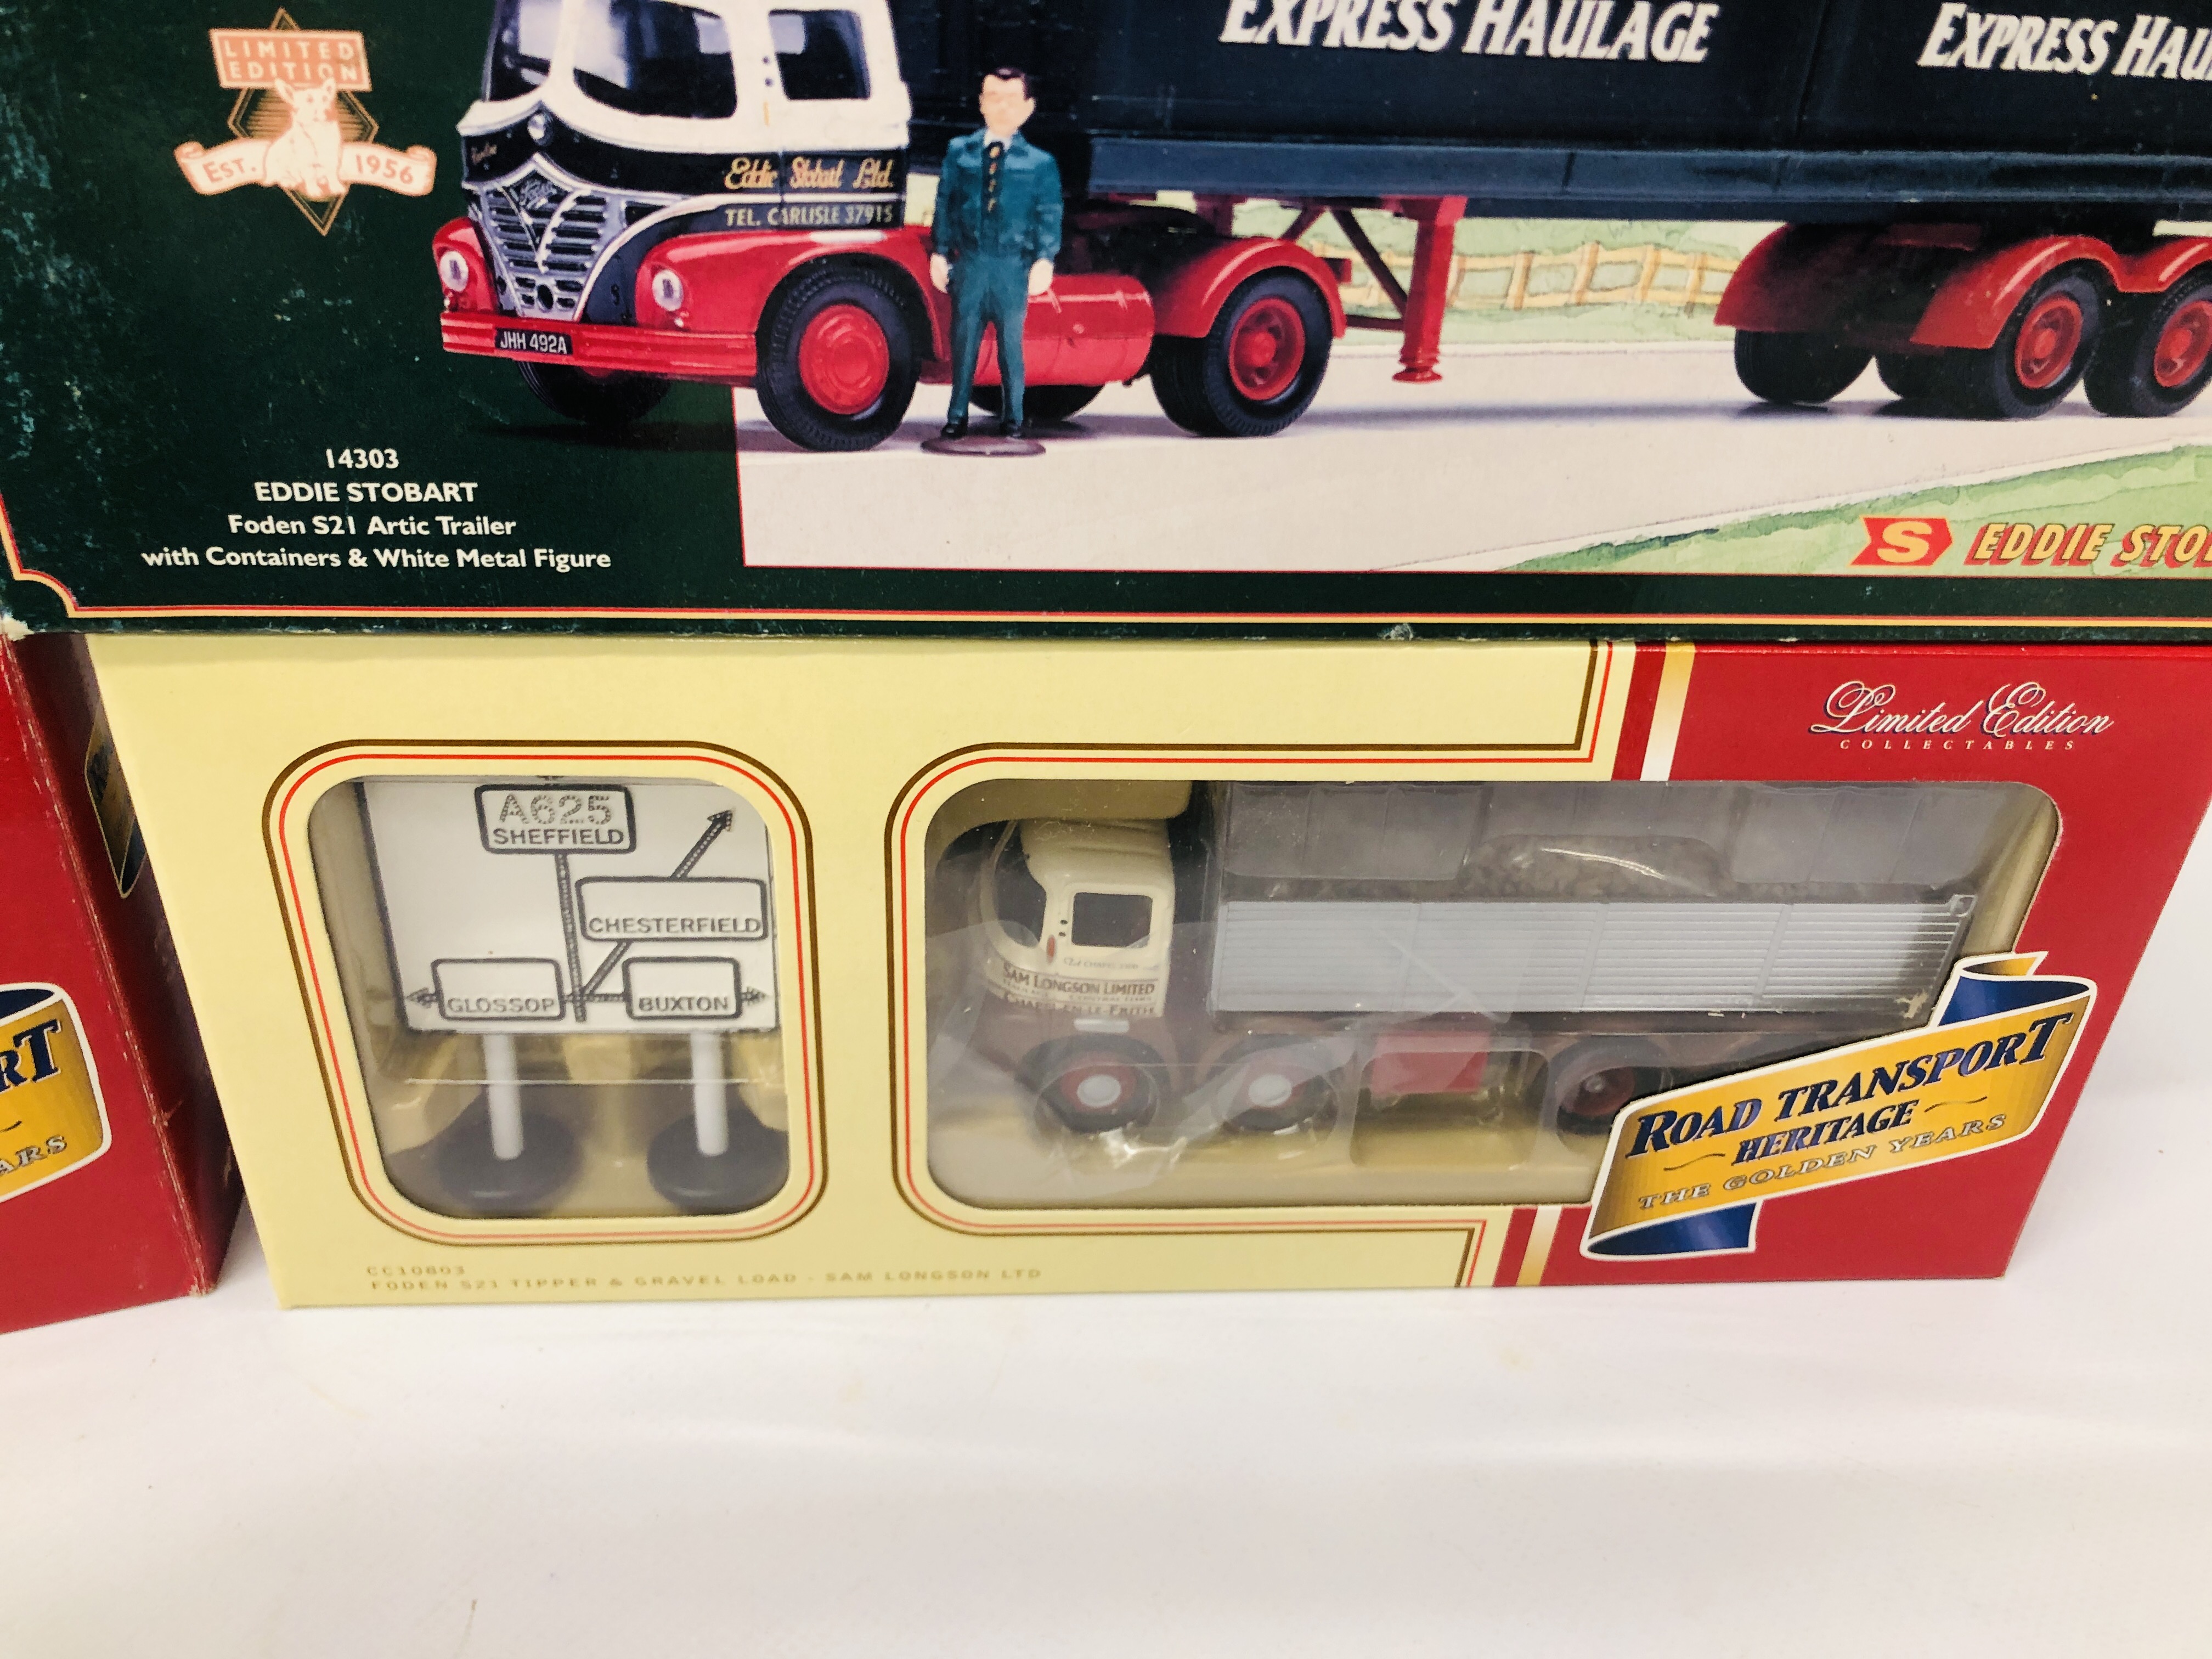 6 X BOXED CORGI DIE CAST COMMERCIALS TO INCLUDE 2 X FODEN S21 TIPPER, FODEN 8 WHEEL RIDGED, - Image 13 of 15